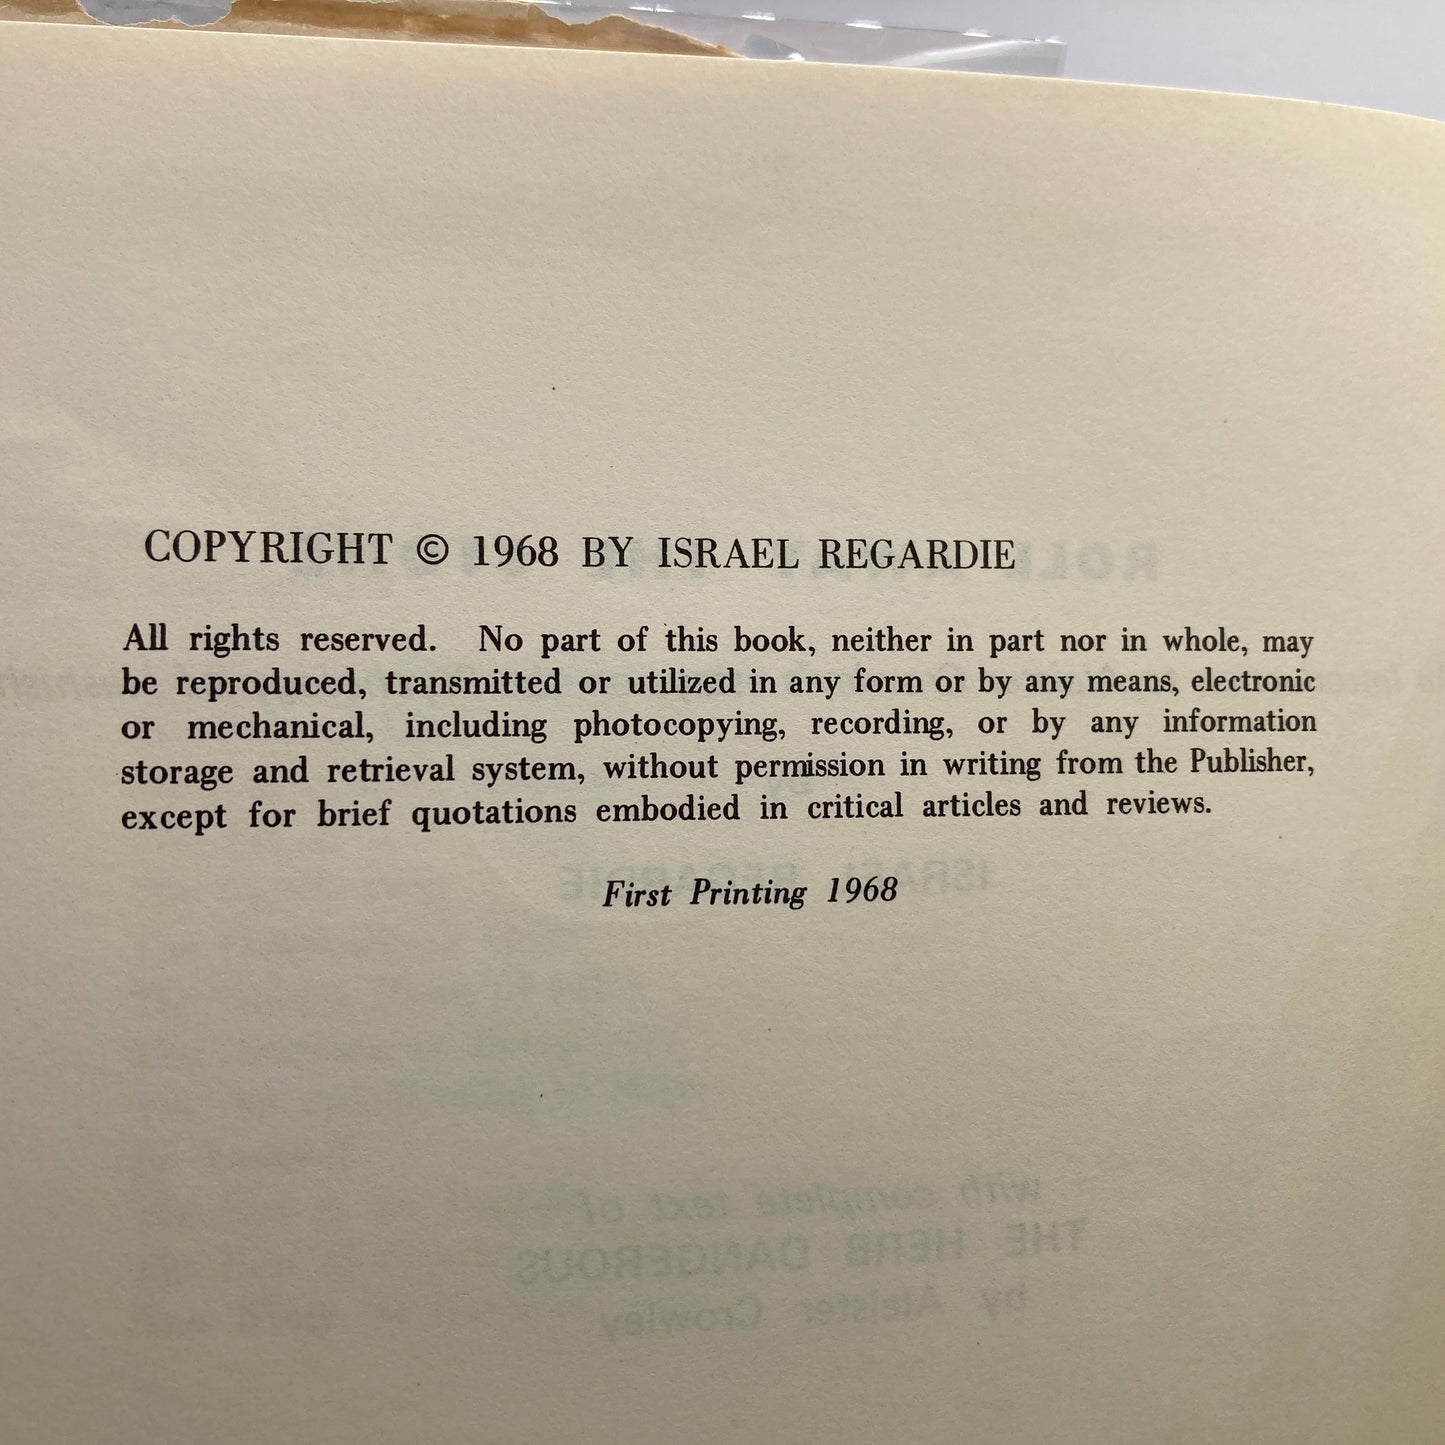 REGARDIE, Israel "Roll Away the Stone, The Psychology of Hashish" [Llewellyn, 1968] Signed 1st